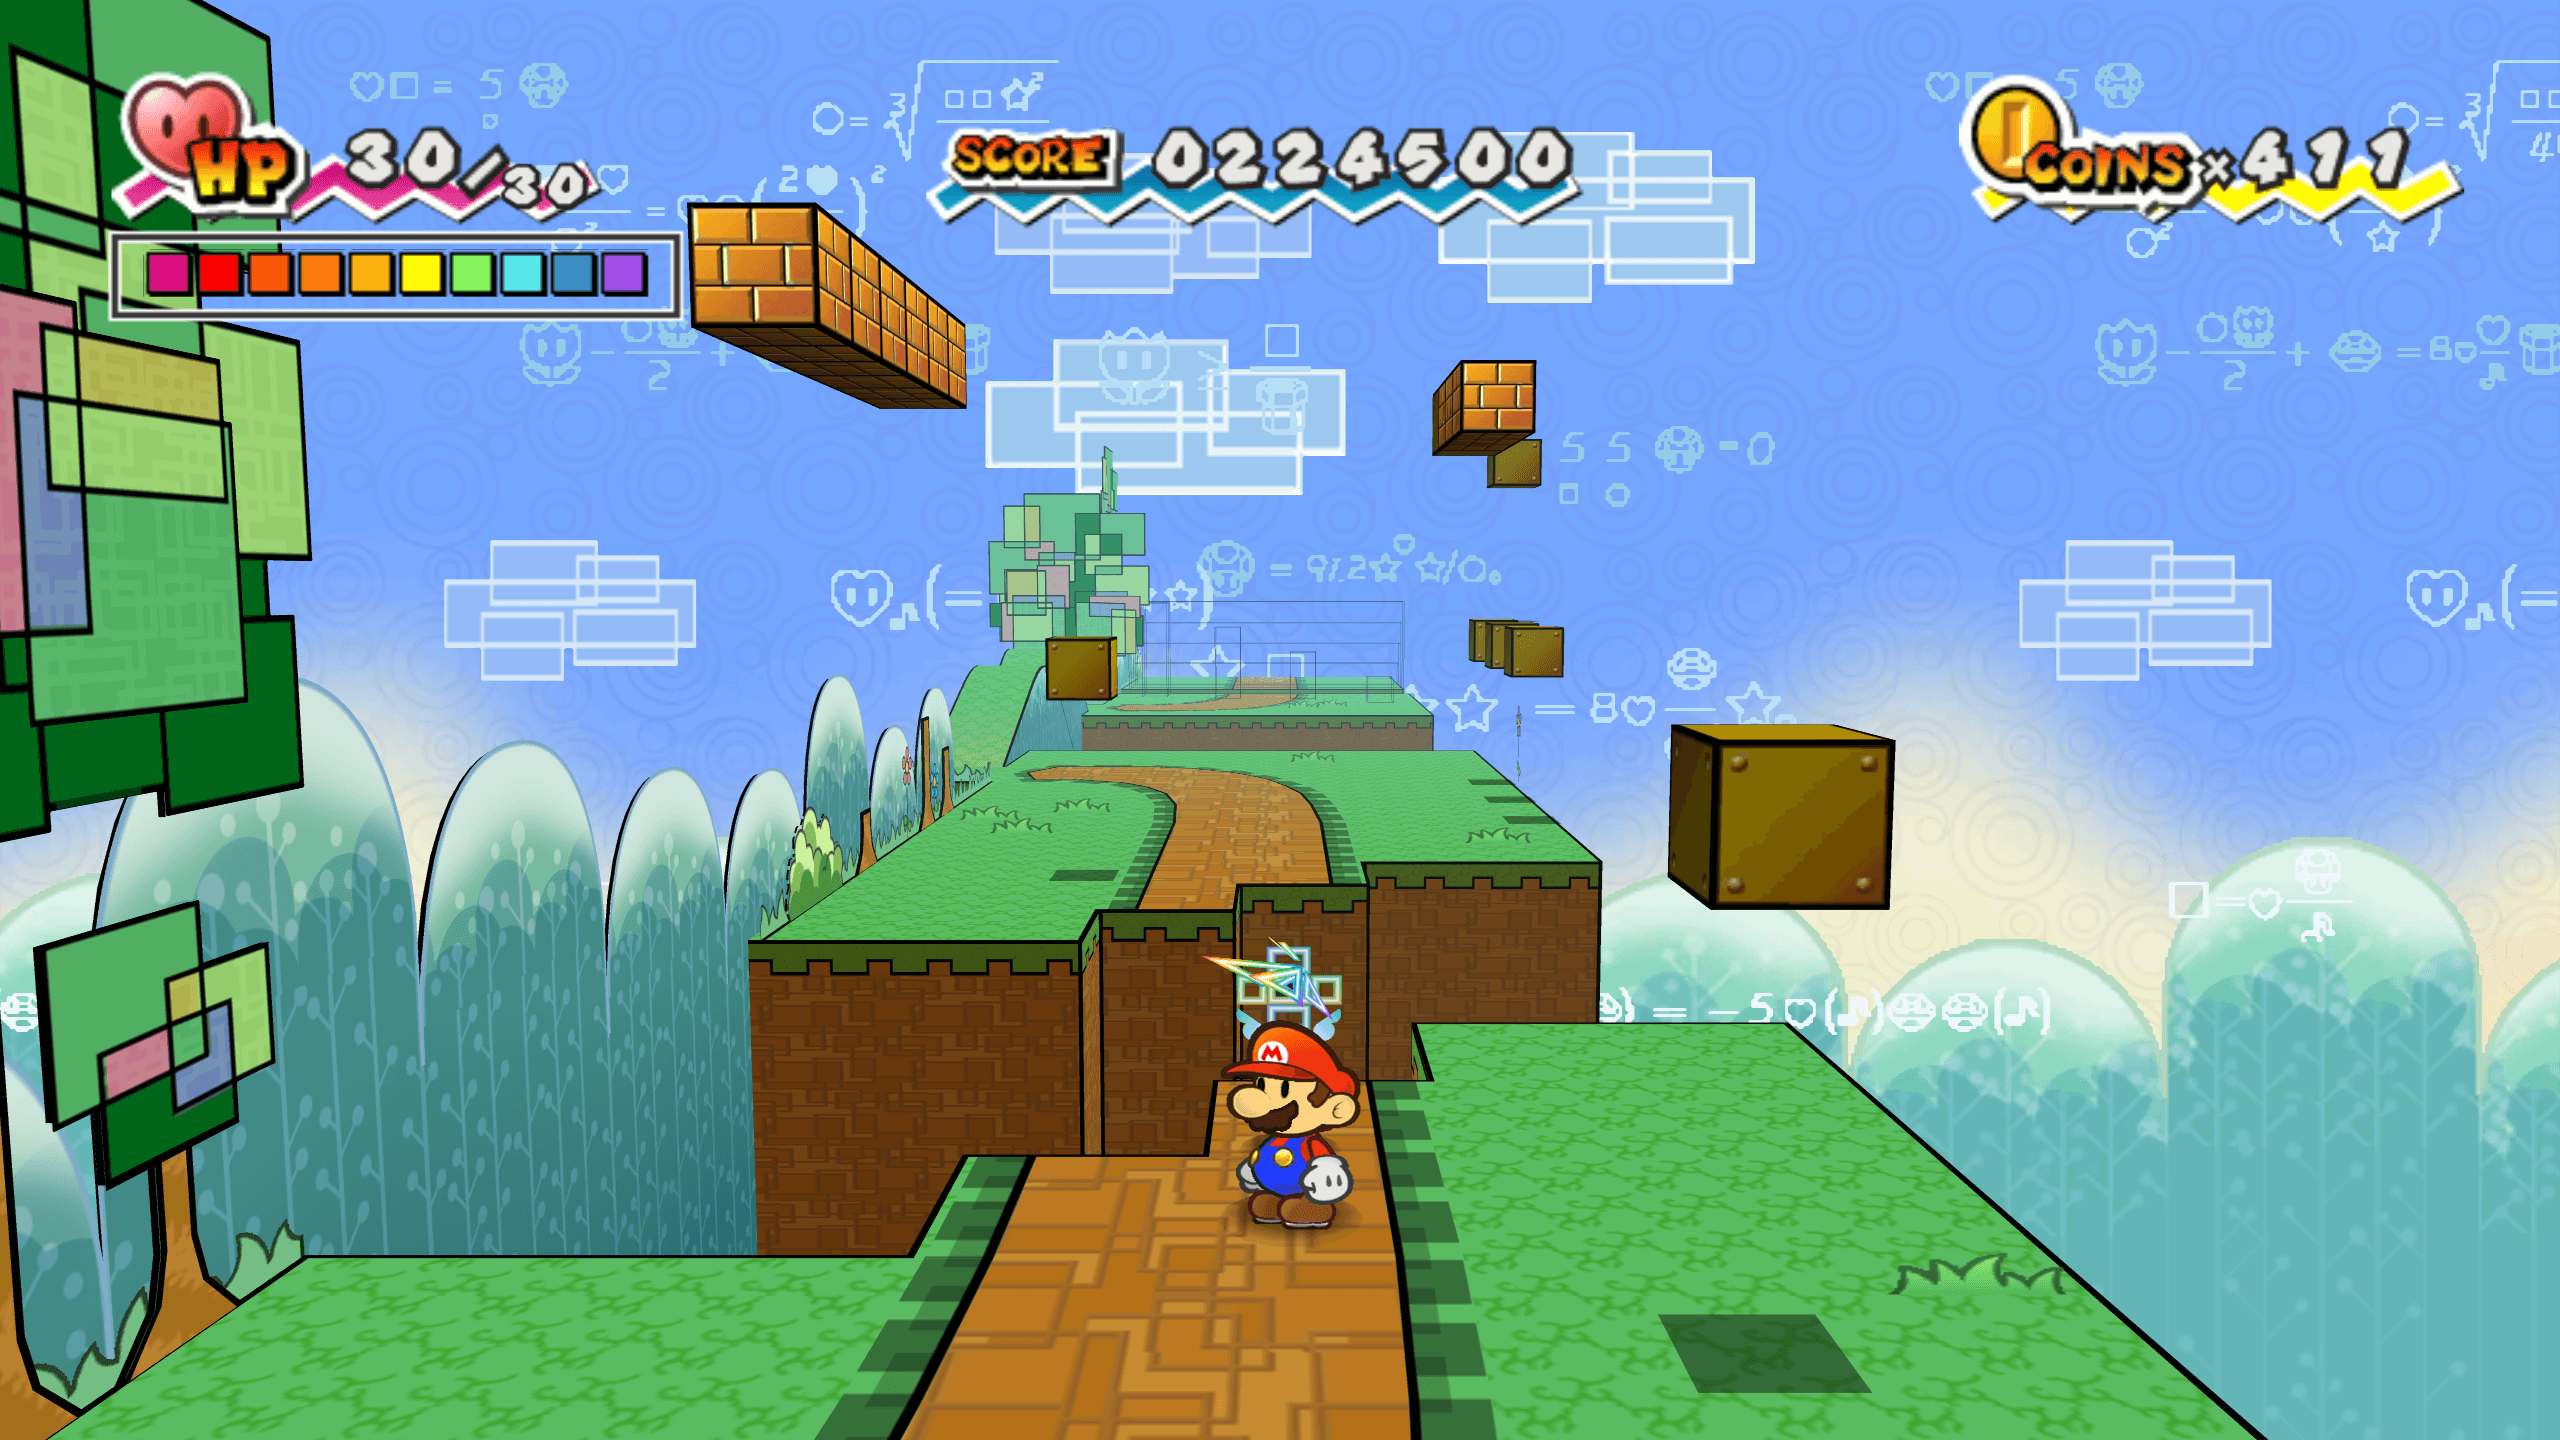 Super Paper Mario World Pictures to Pin.